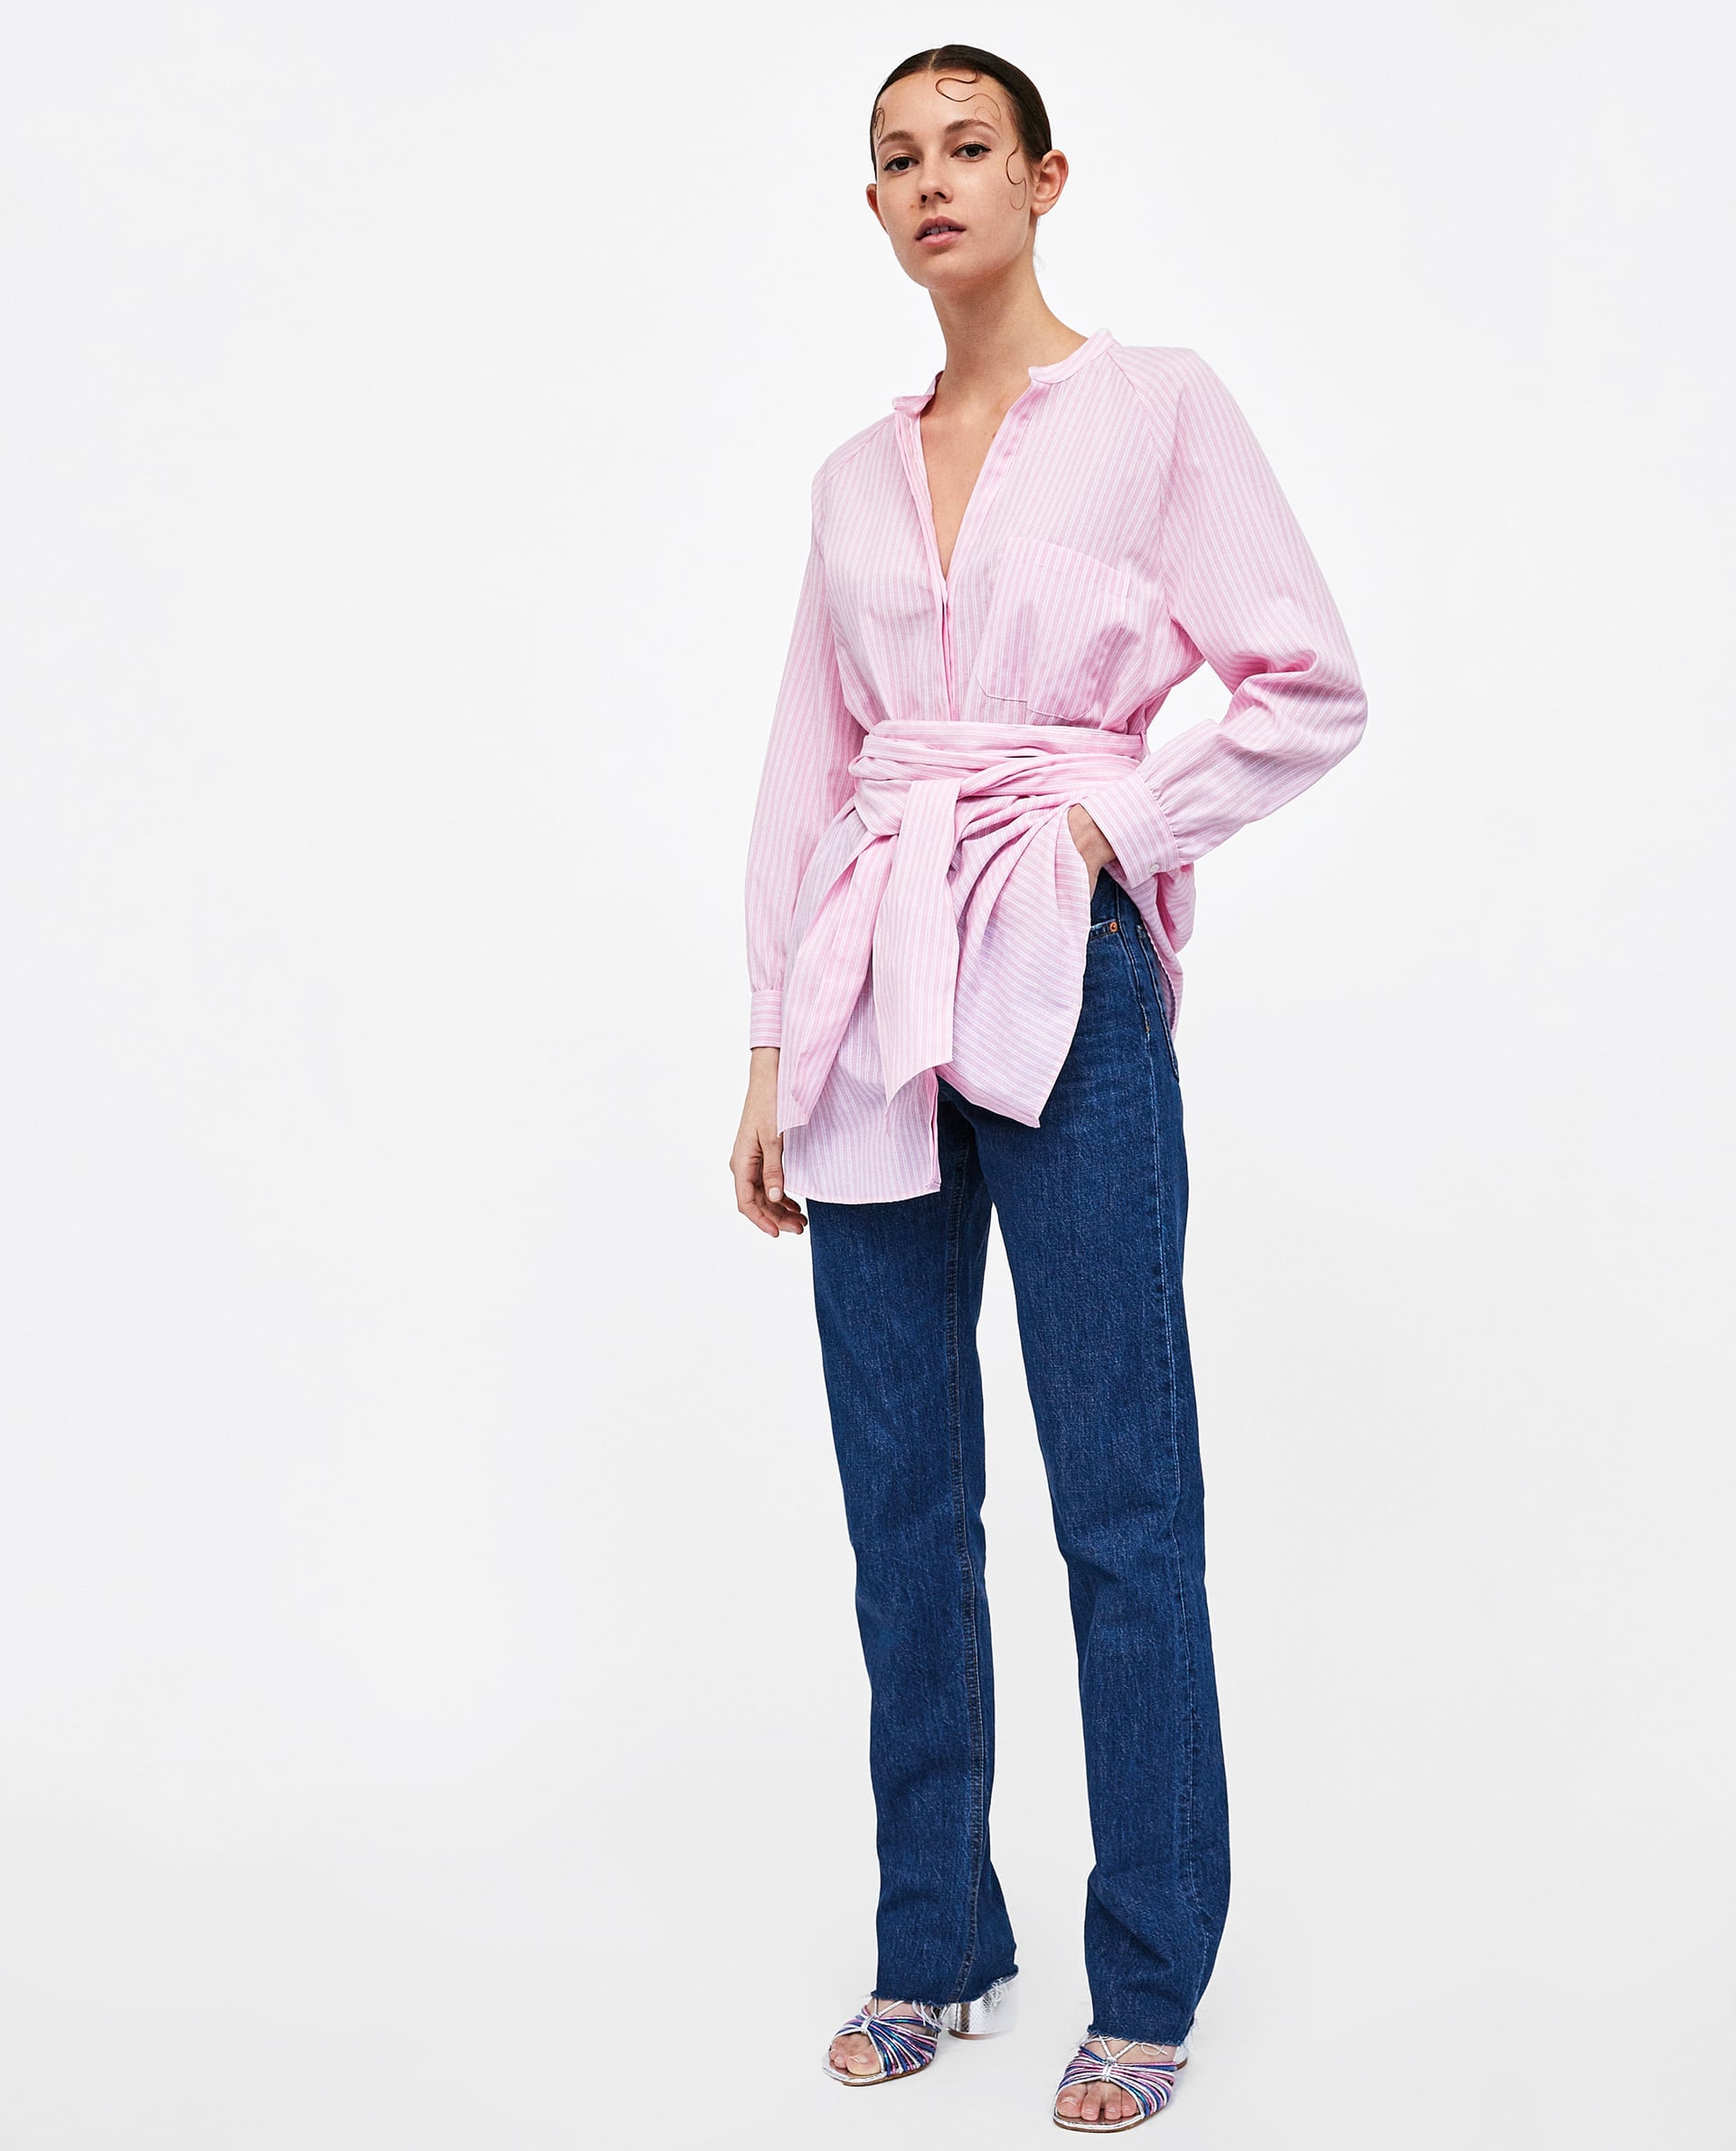 Zara Long Shirt With Bow | 10 Tops That 